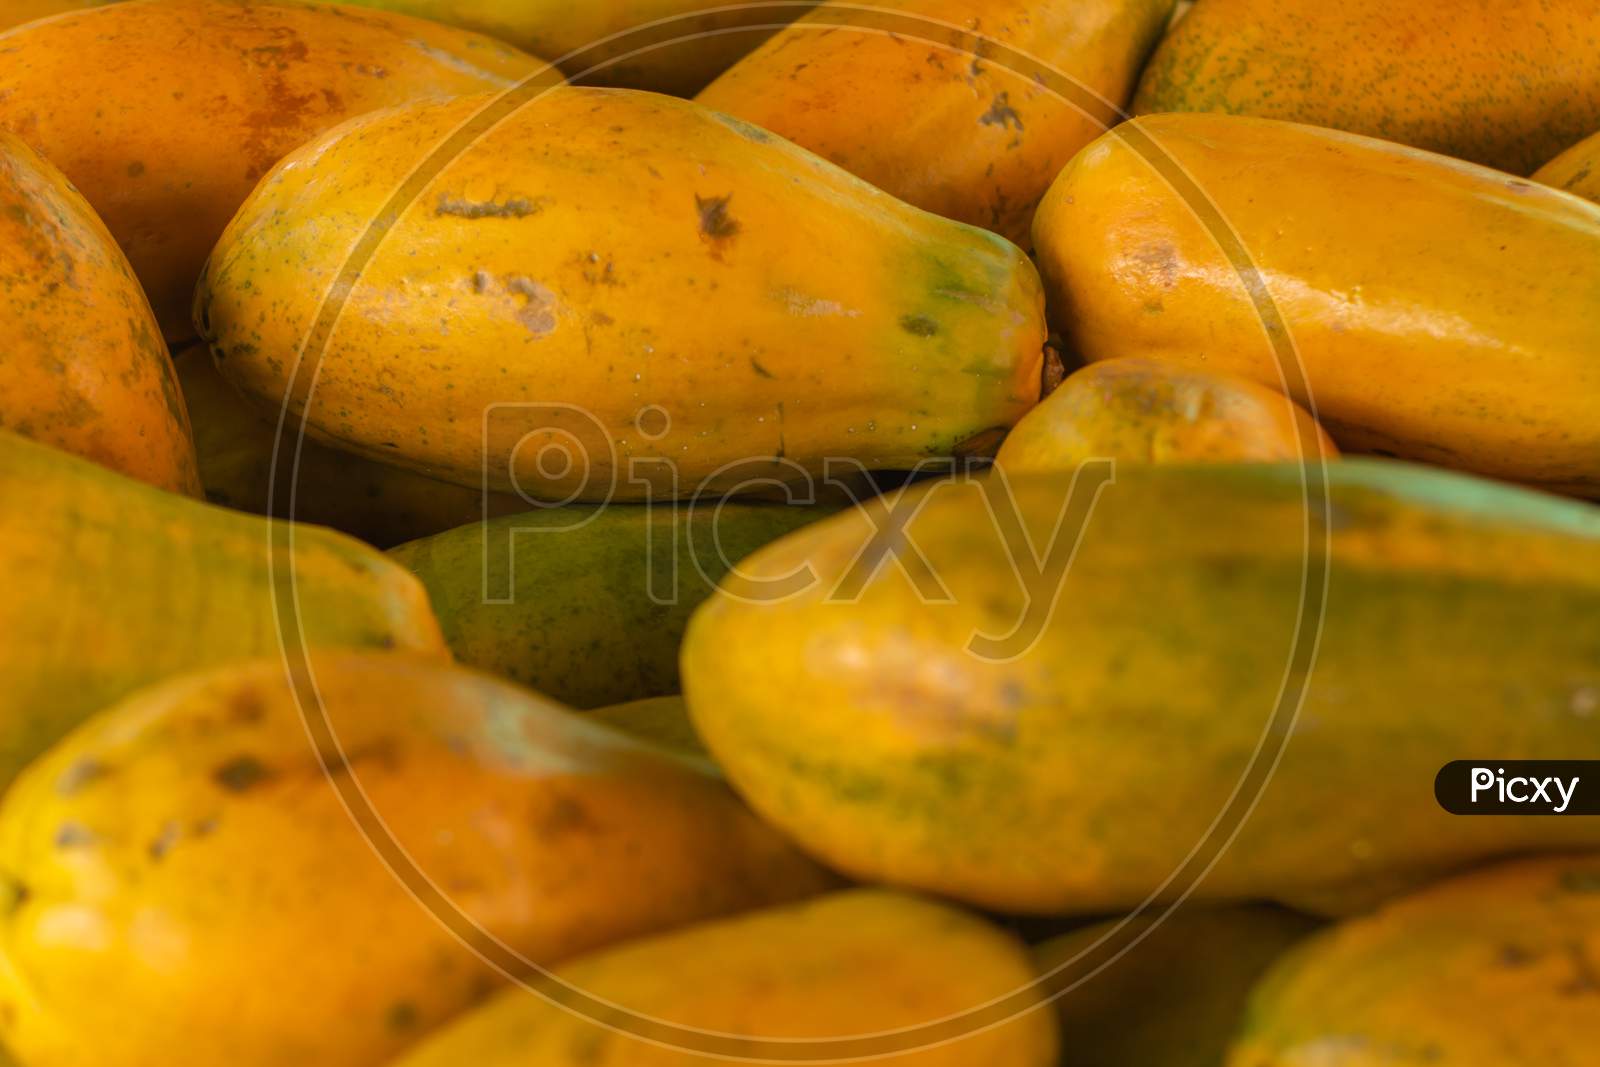 Papaya In The Market. Fruit Of Orange Pulp With Countless Small Seeds. Exotic Tropical Fruit